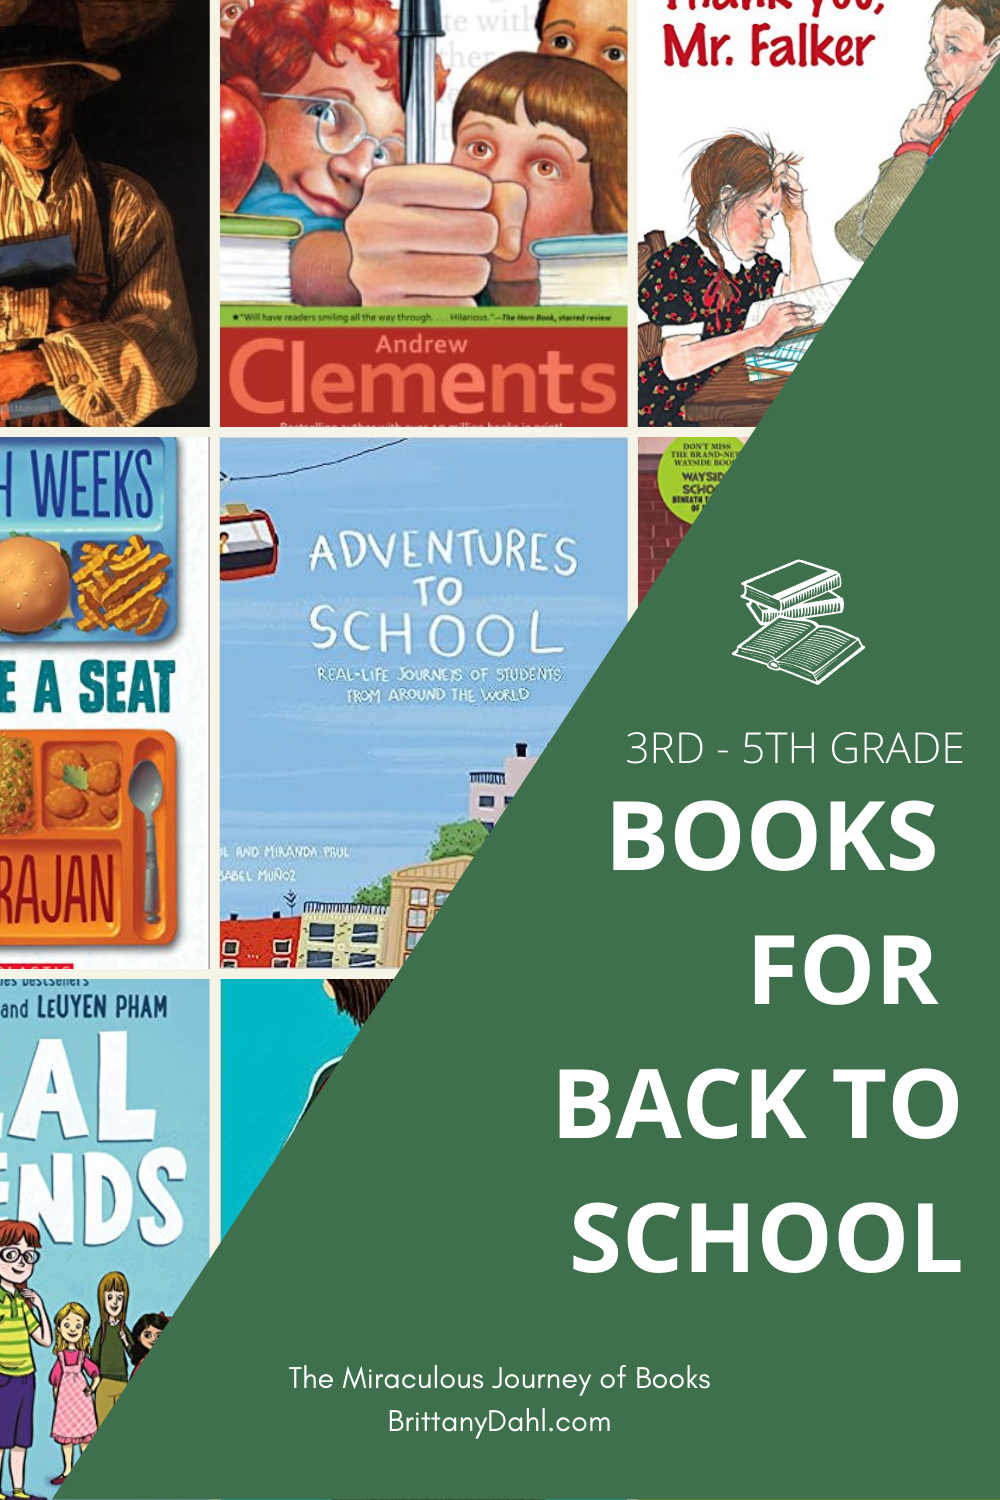 3rd - 5th Grade Books for Back to School from The Miraculous Journey of Books at BrittanyDahl.com. Image of books featured in this blog post: Frindle, Thank you Mr. Falker, Save Me a Seat, Adventures to school, Real Friends, and more.